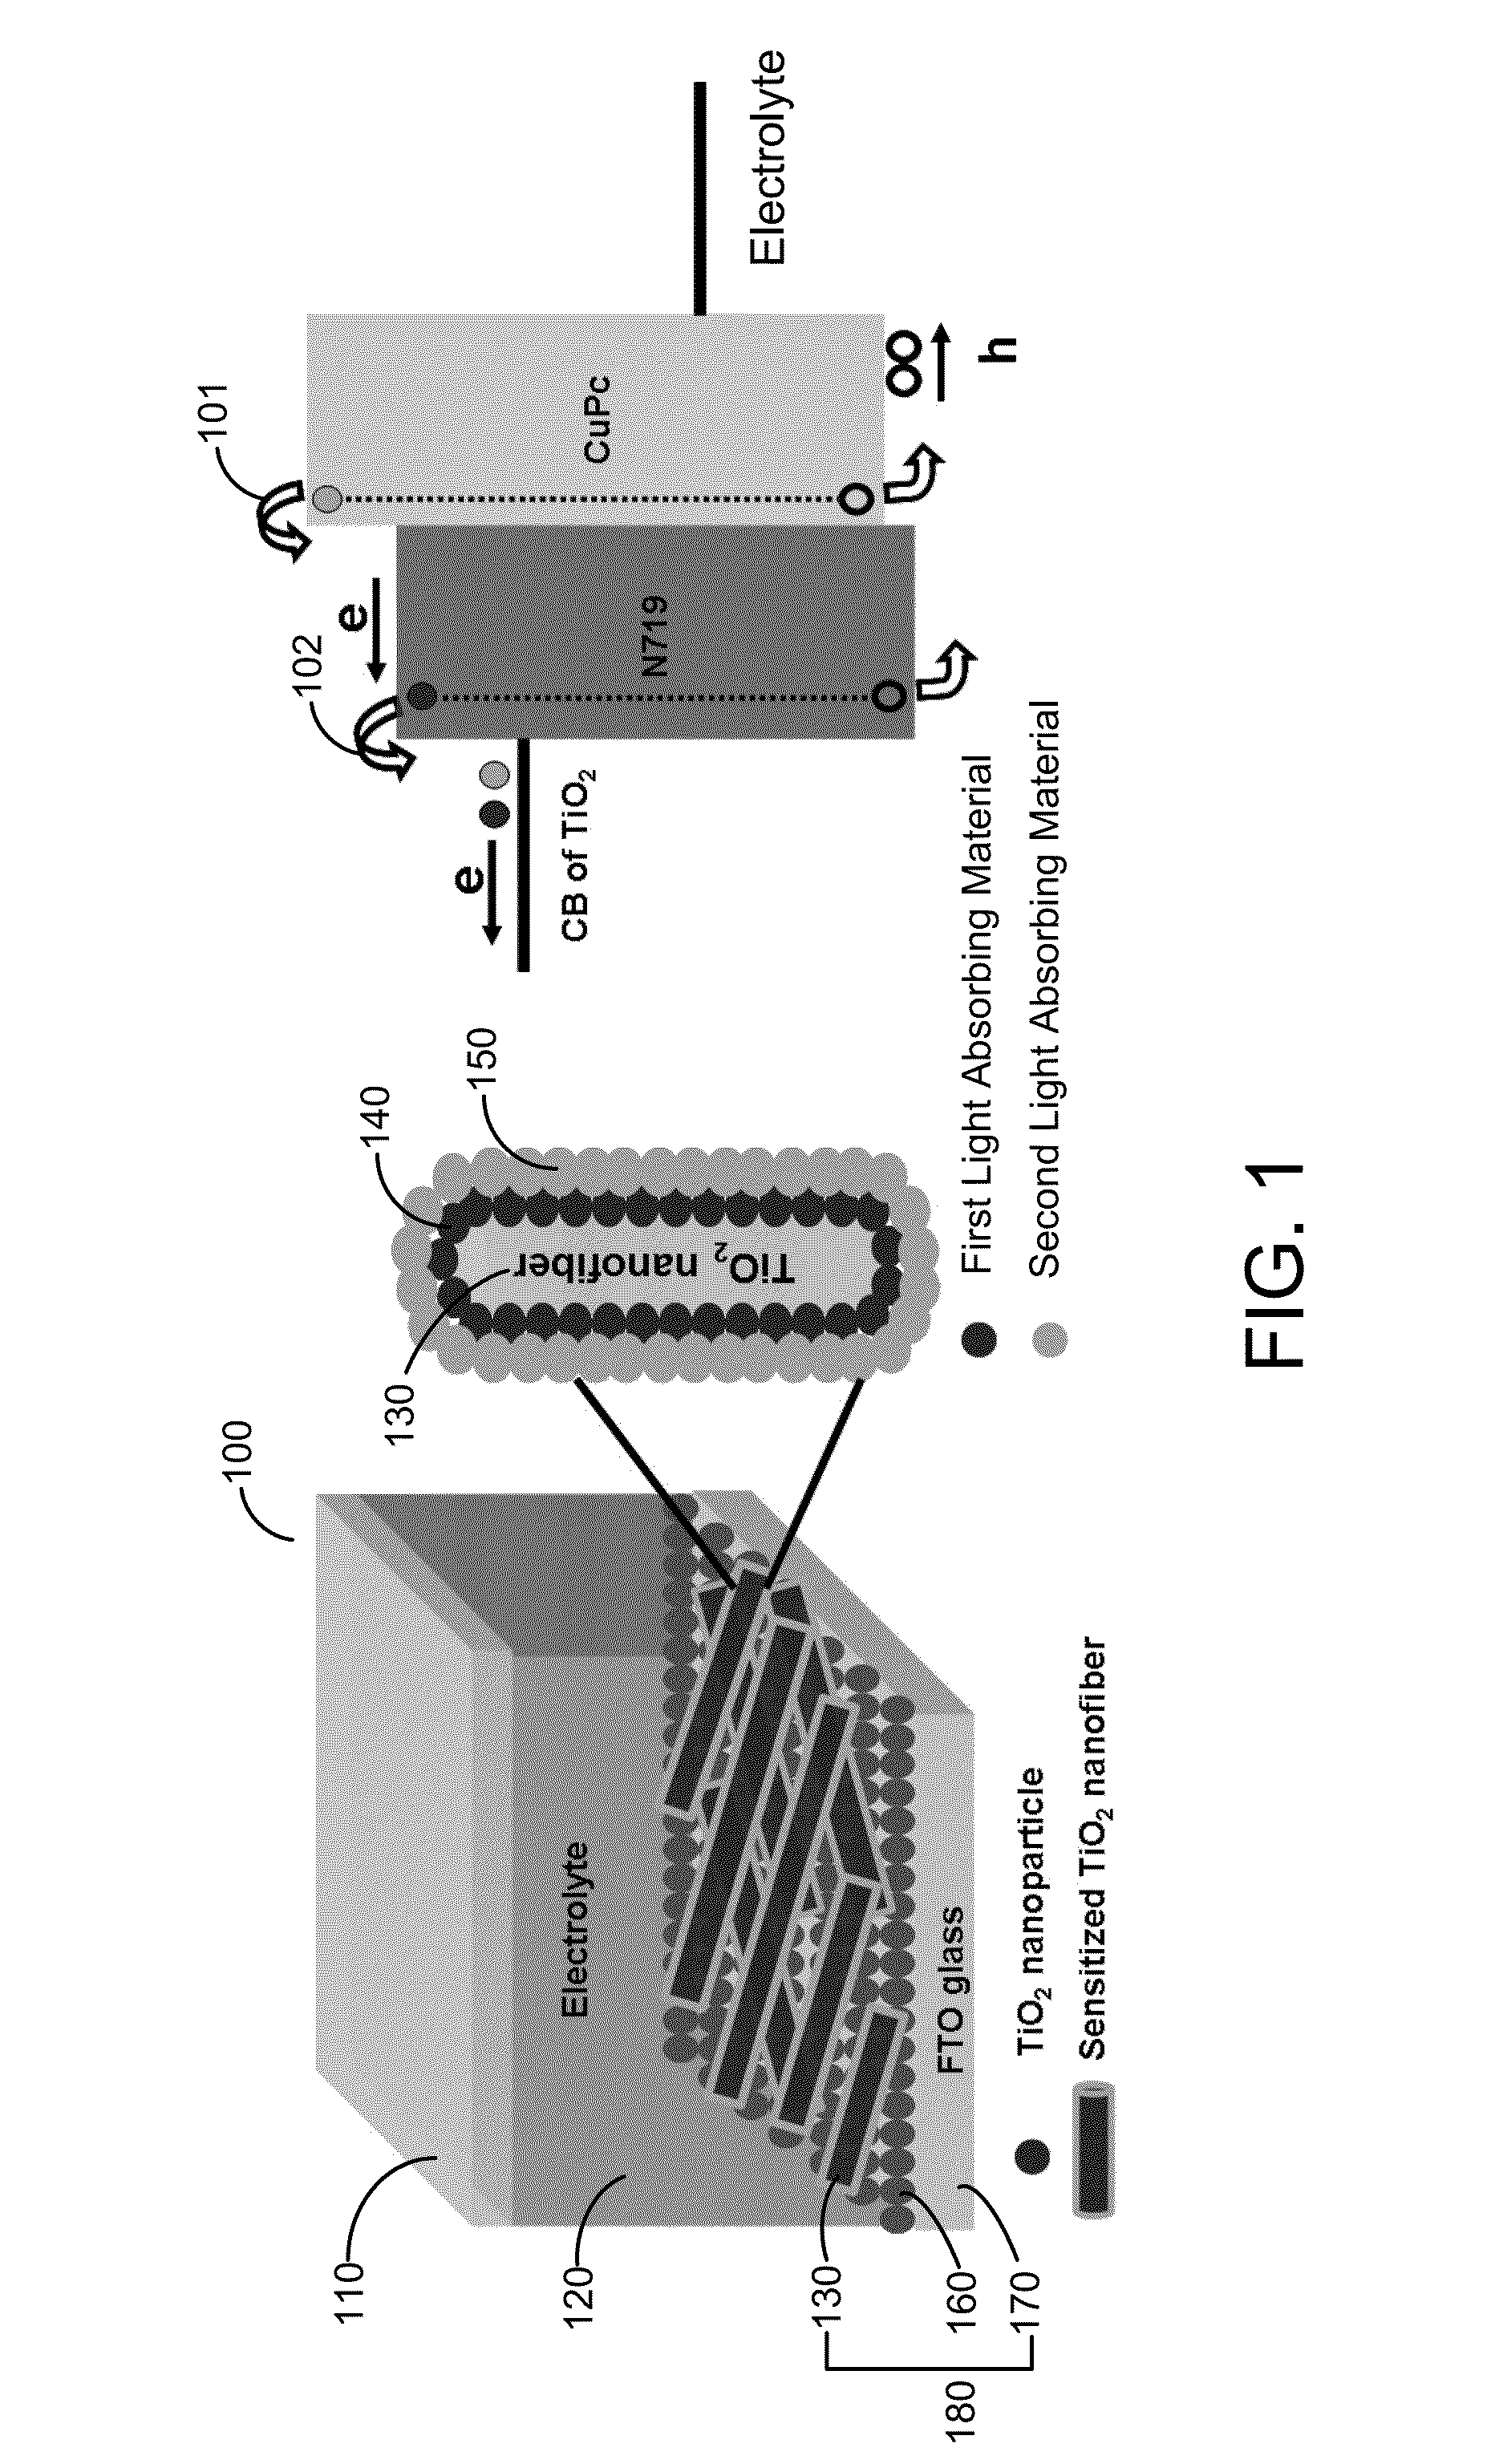 Dye-sensitized solar cell based on indirect charge transfer